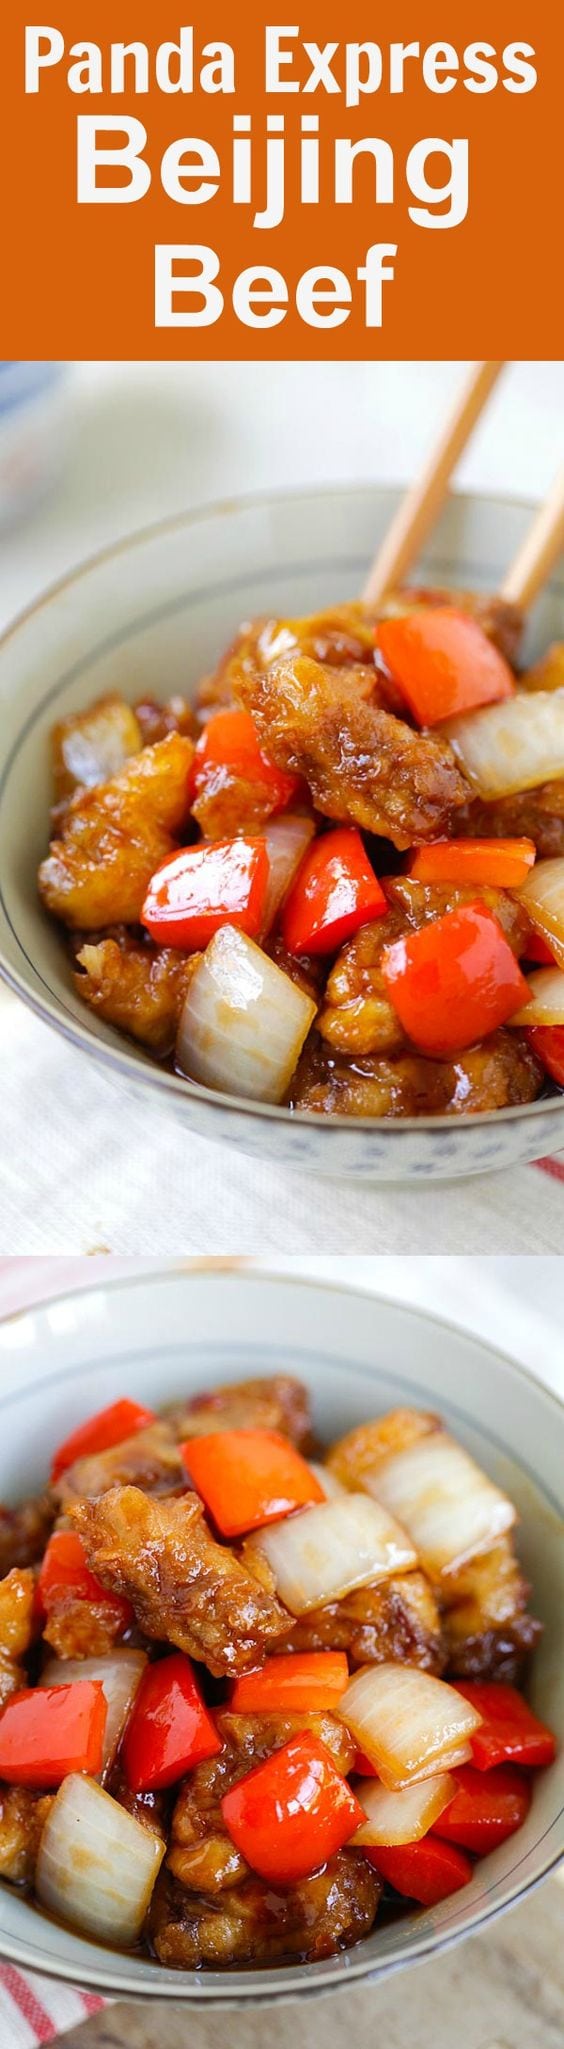 Panda Express Beijing Beef Copycat – the most delicious Beijing Beef that tastes exactly like Panda Express, but healthier and much better than takeout | rasamalaysia.com